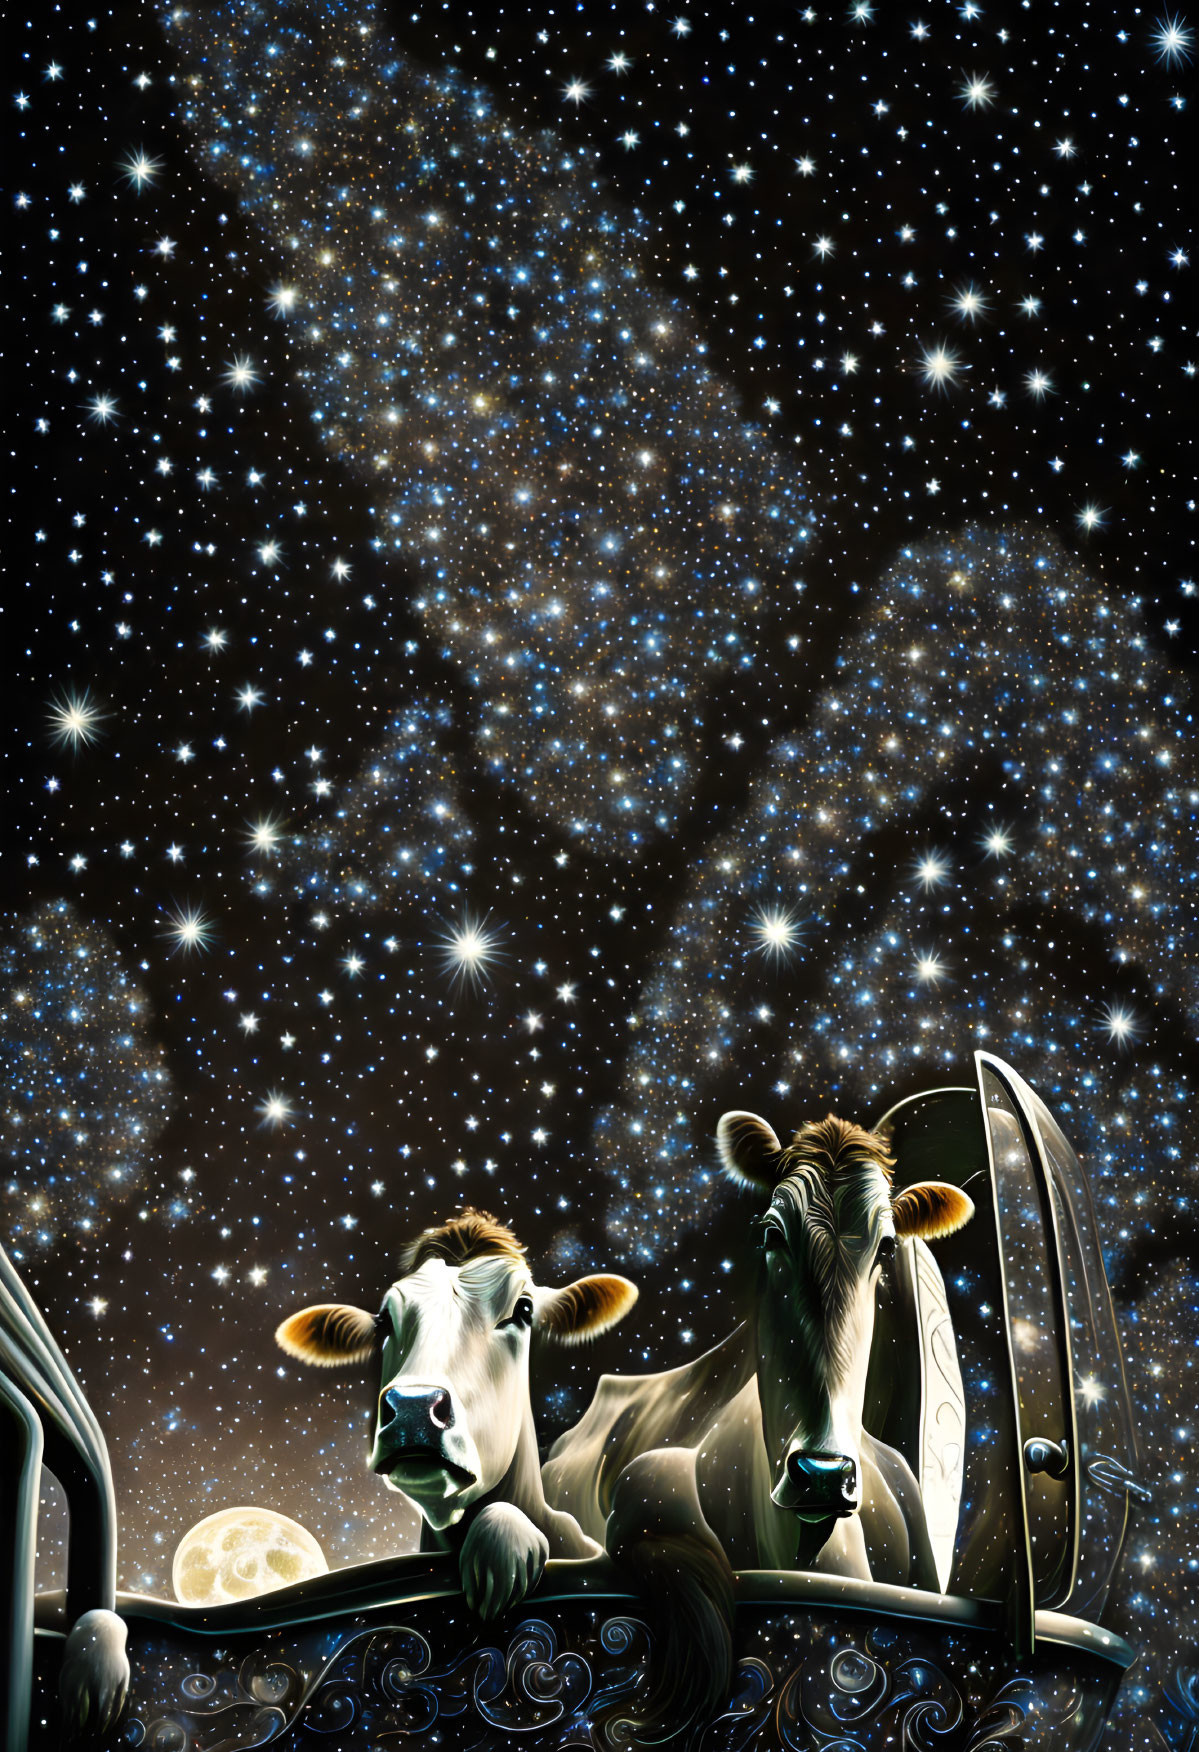 Whimsical cows in vintage car under starry sky with crescent moon